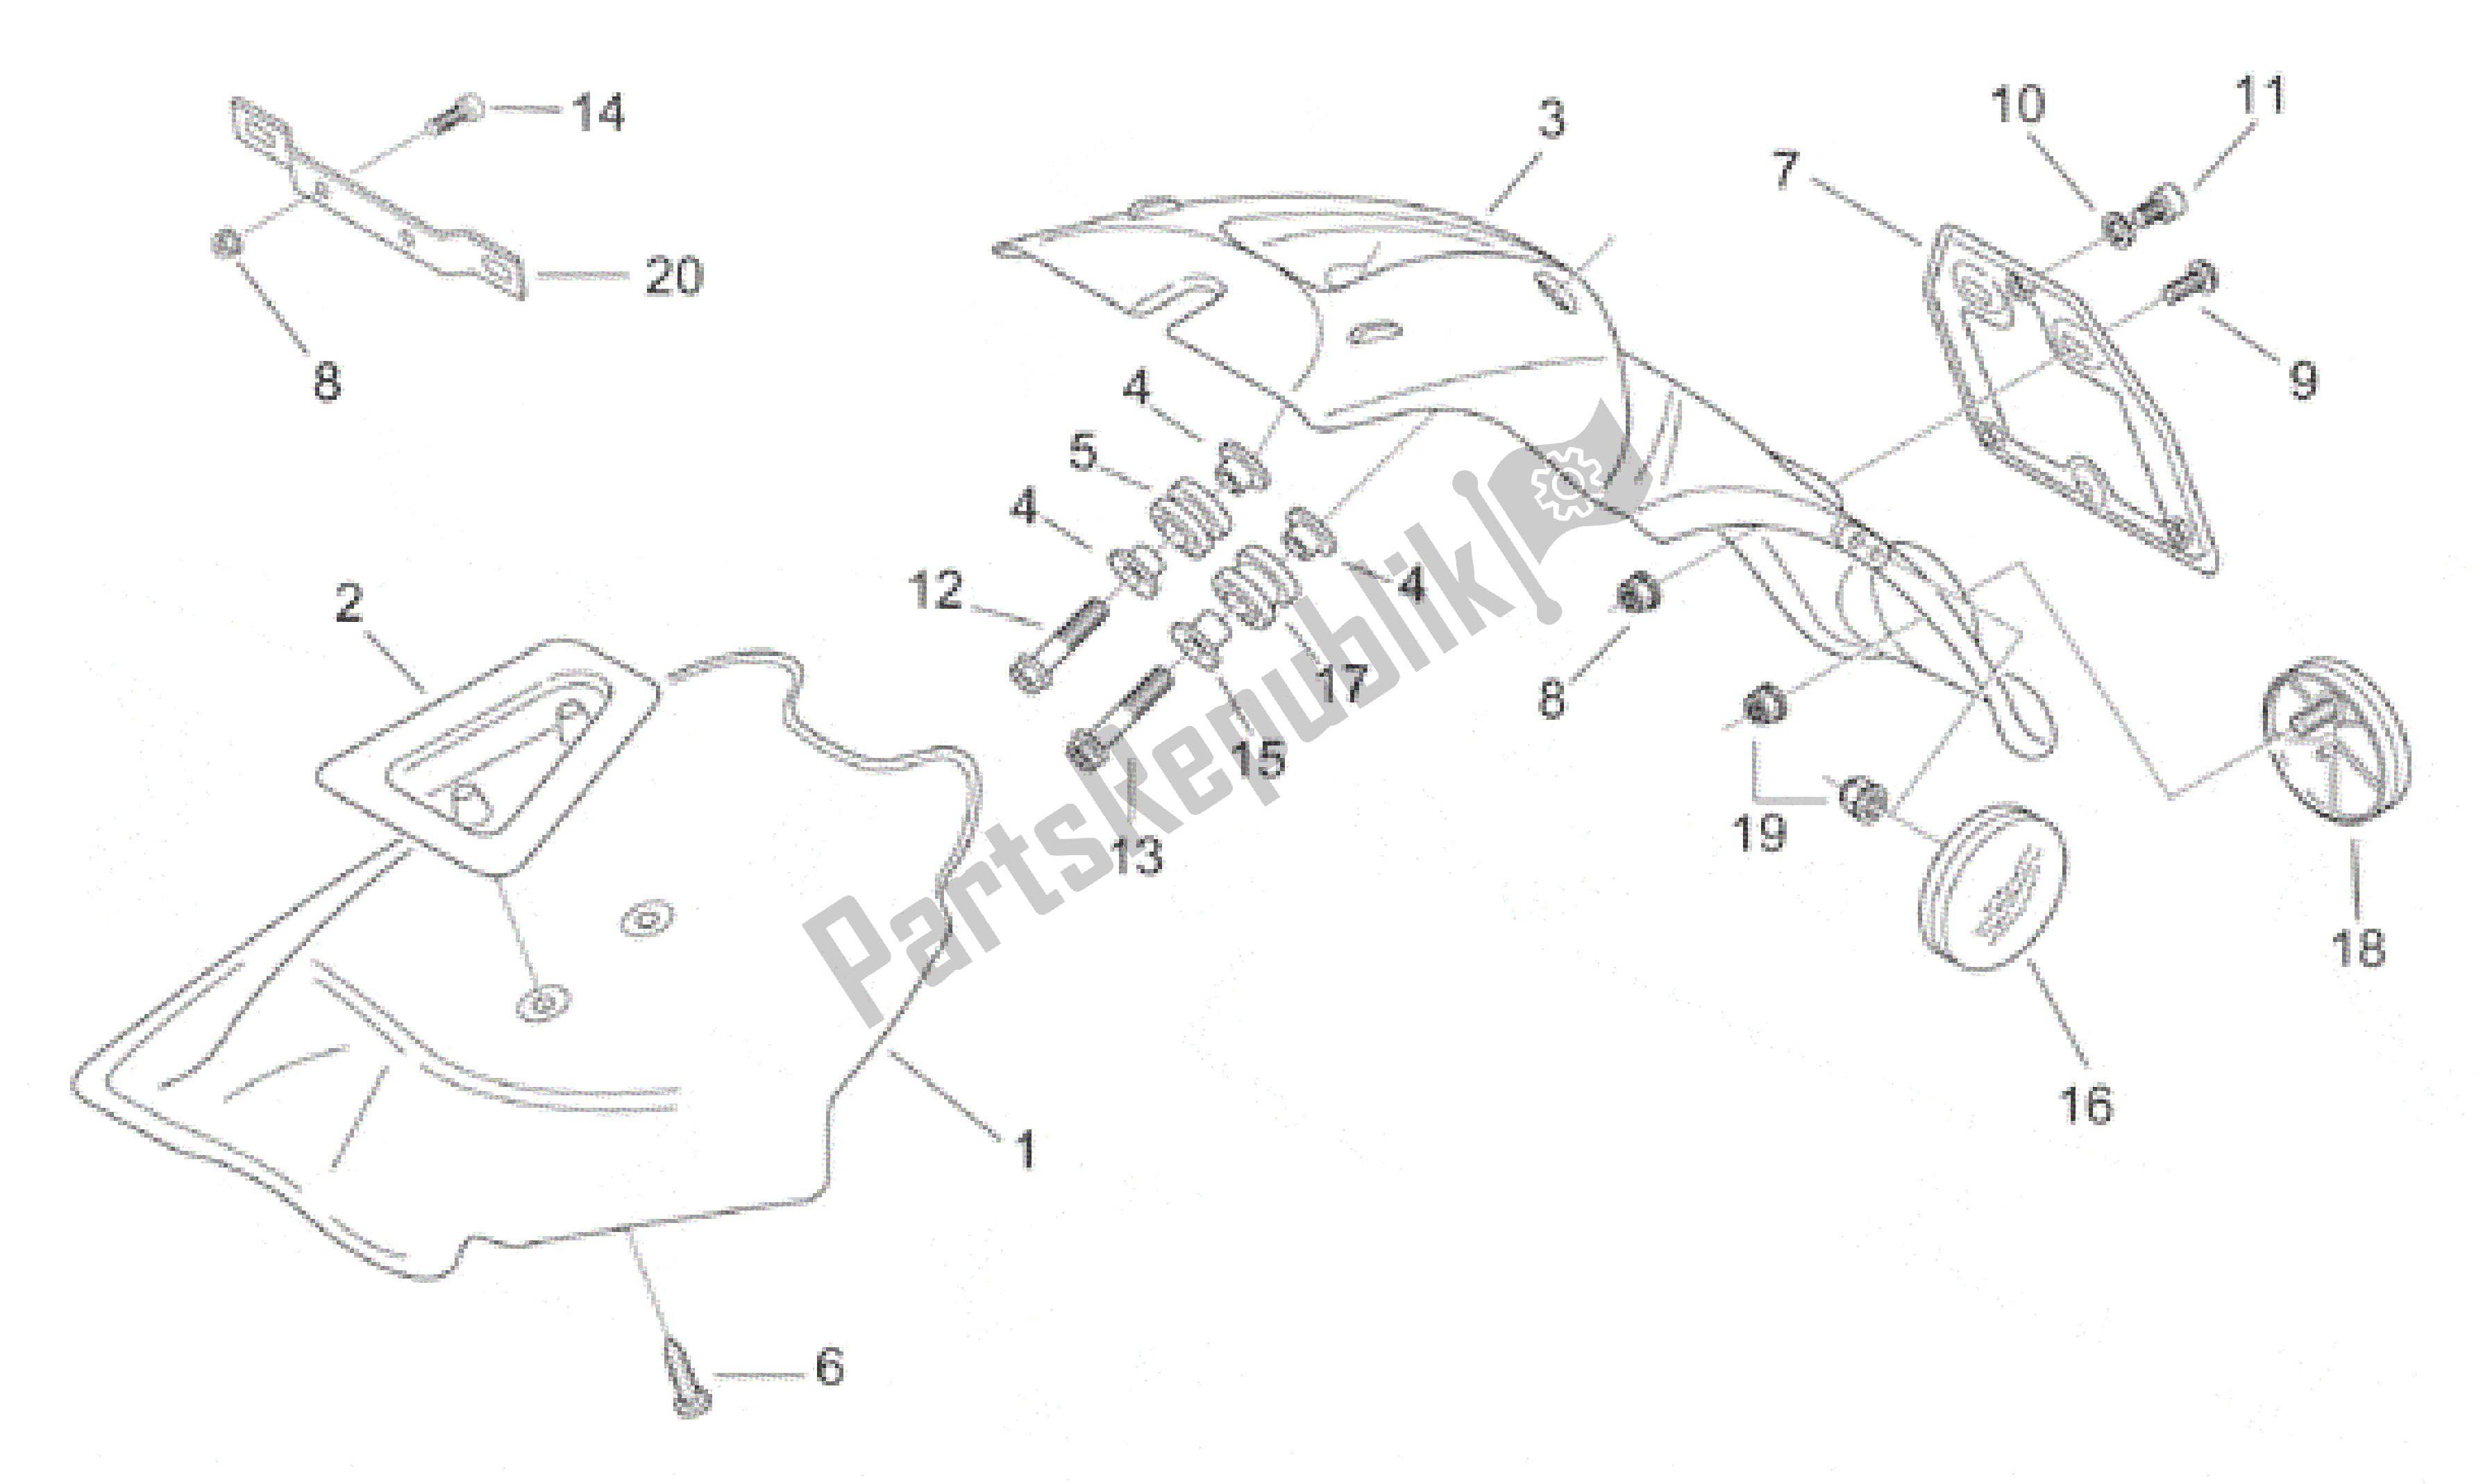 All parts for the Rear Body Iii - Mudguard of the Aprilia Scarabeo 50 1998